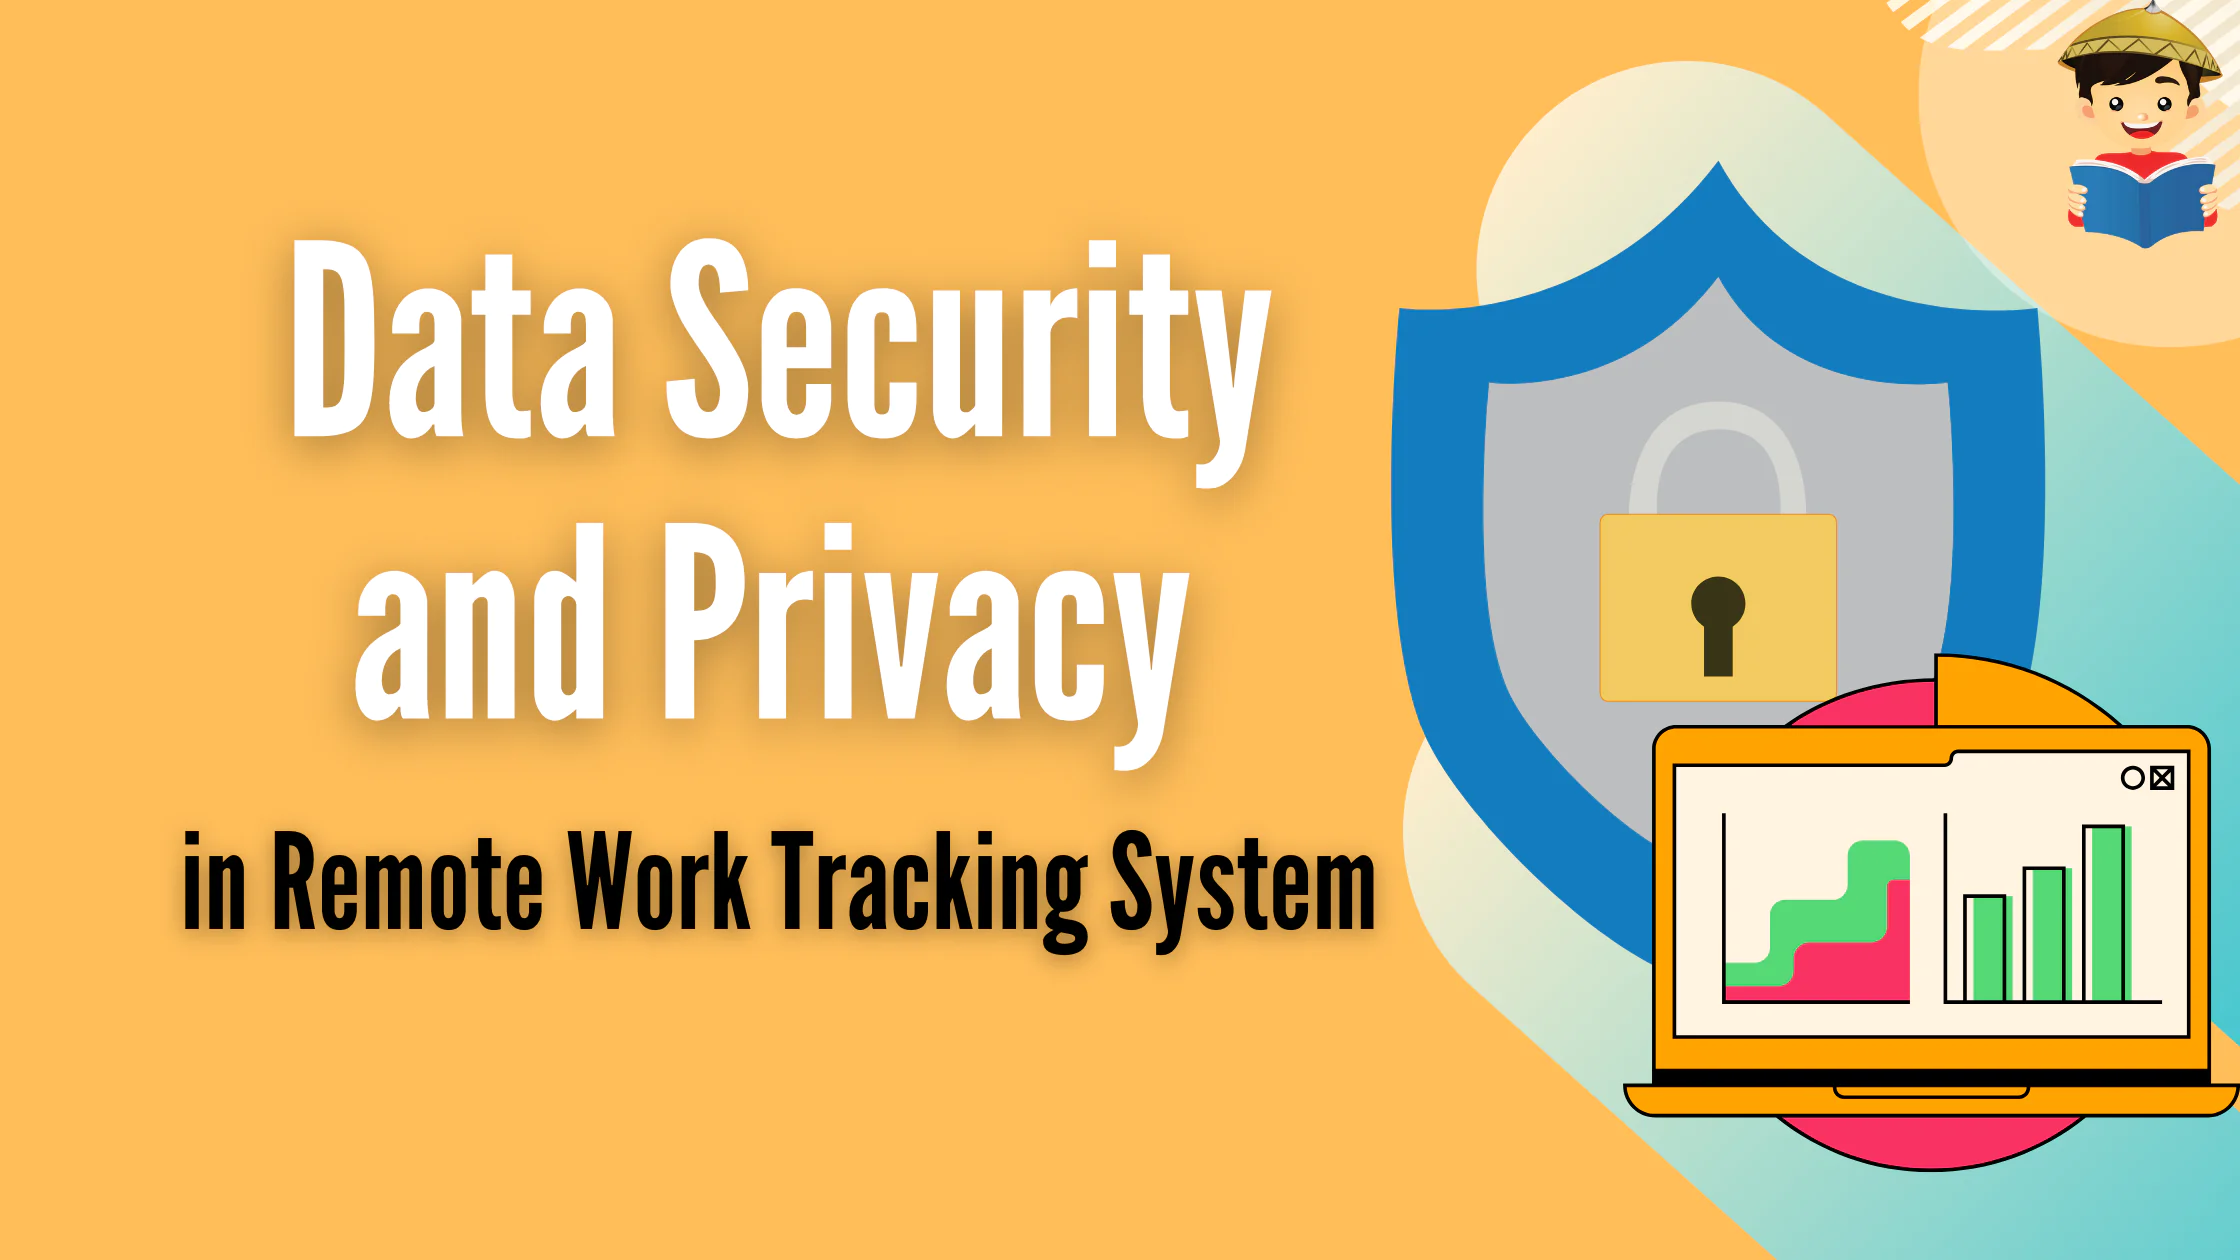 Ensuring Data Security and Privacy in Remote Work Tracking Systems